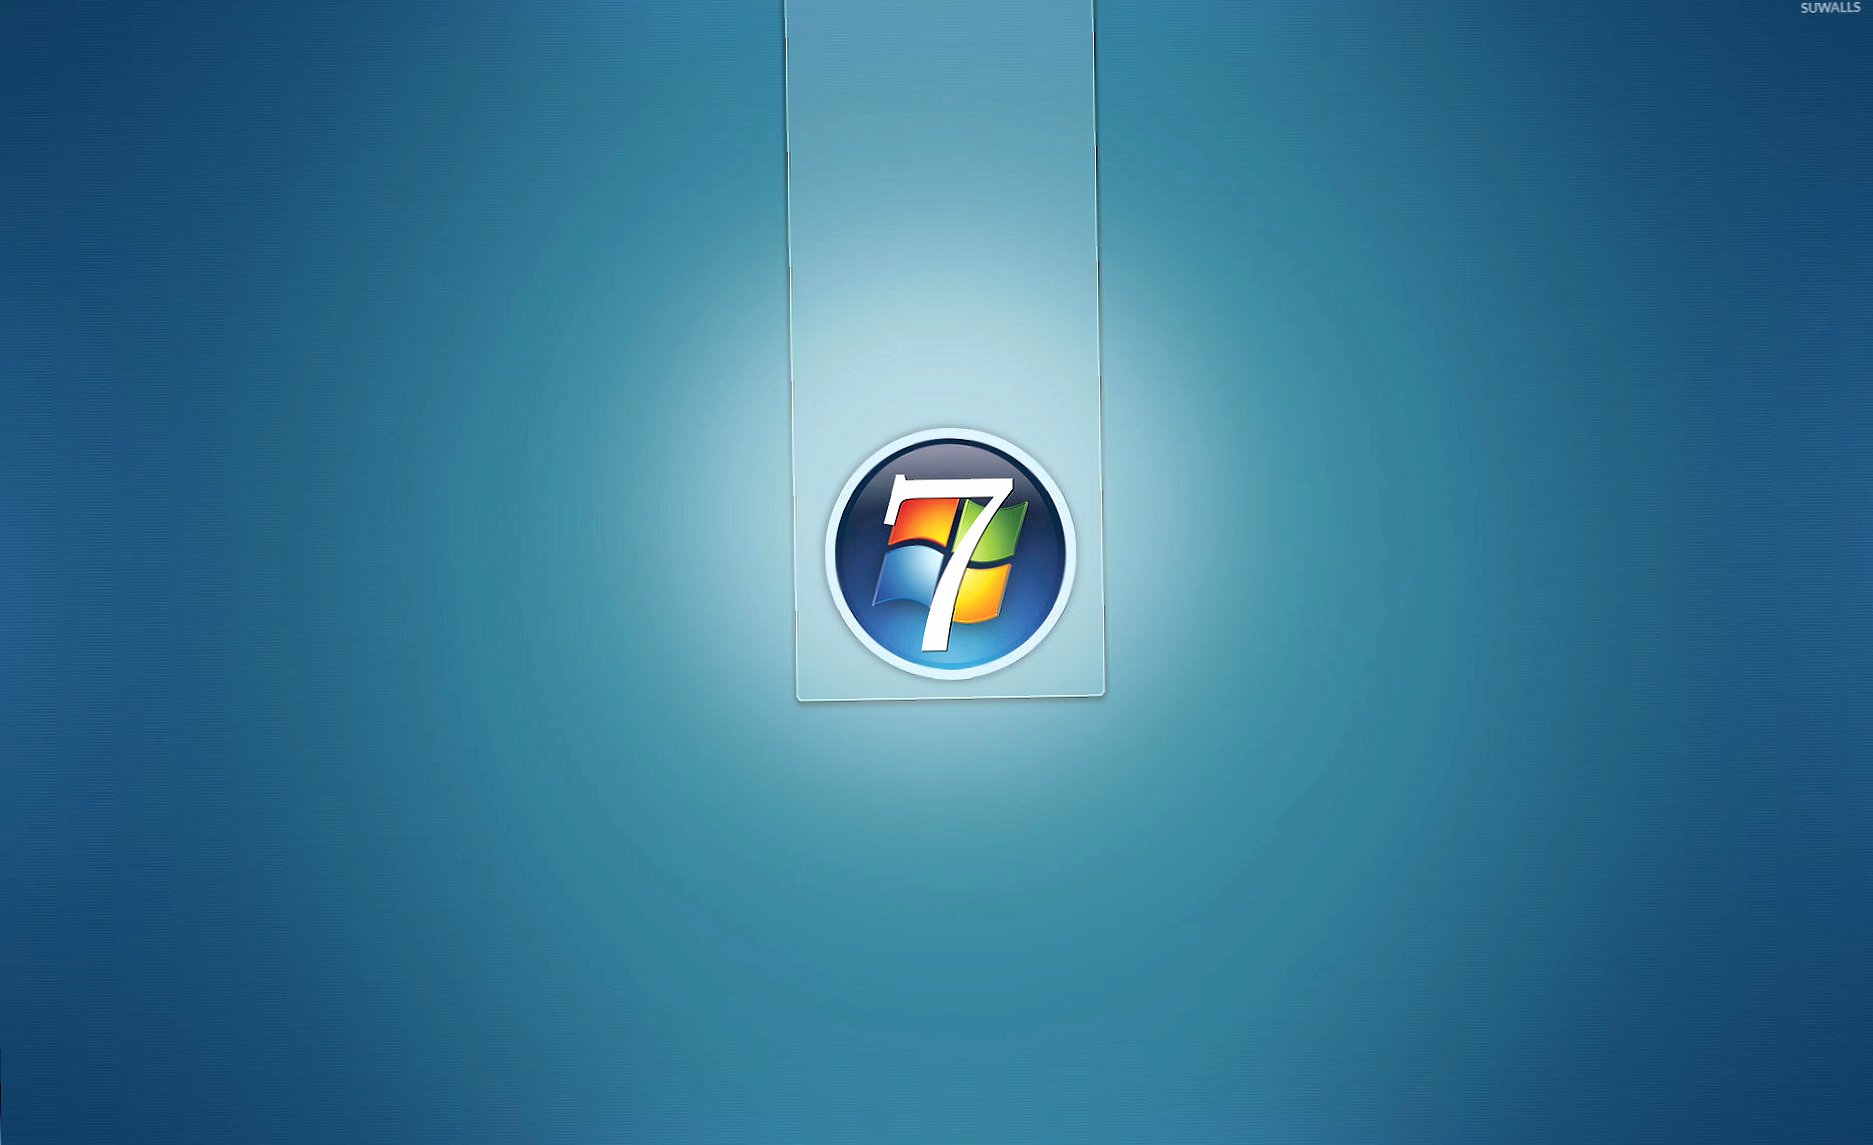 Light Windows 7 logo in a circle wallpapers HD quality